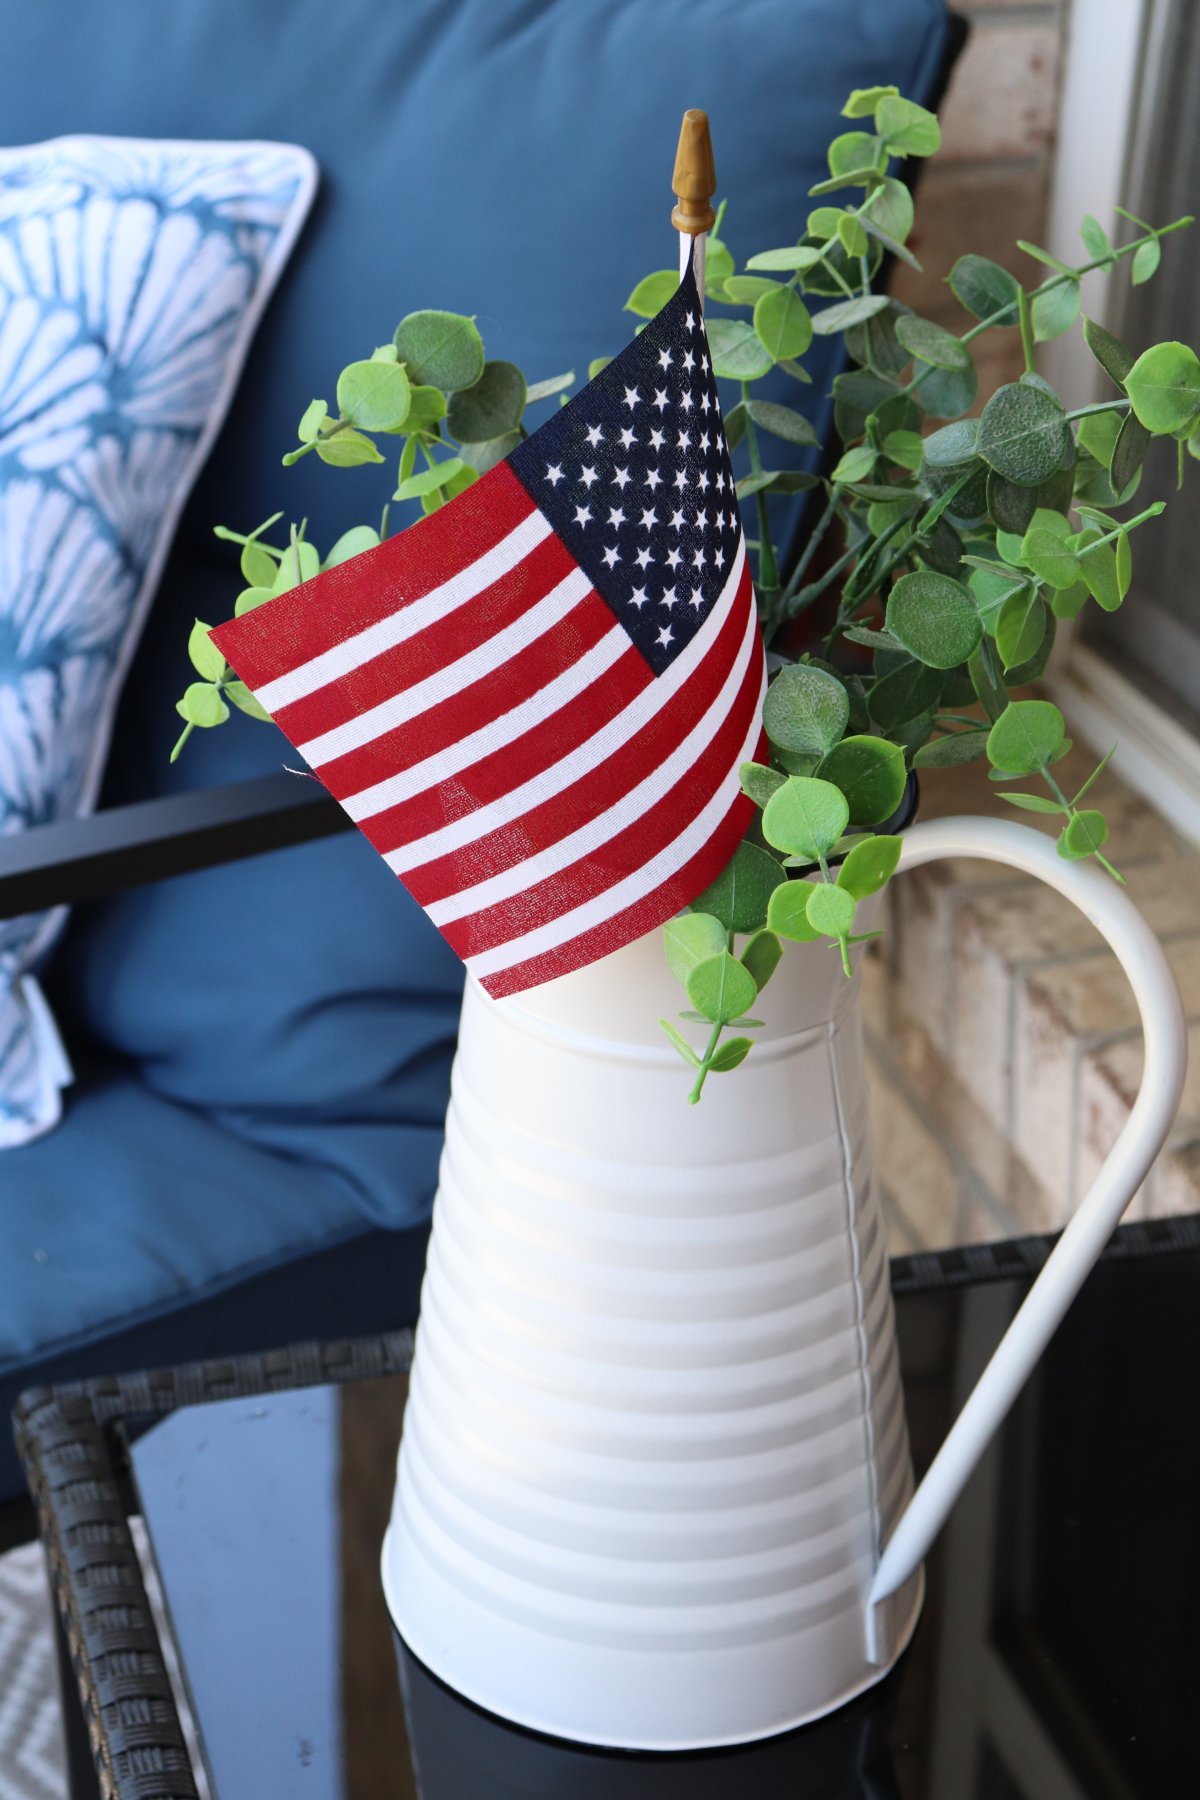 Image contains a white pitcher filled with faux eucalyptus and a small American flag. It sits on a black outdoor table with a blue outdoor rocking chair in the background.